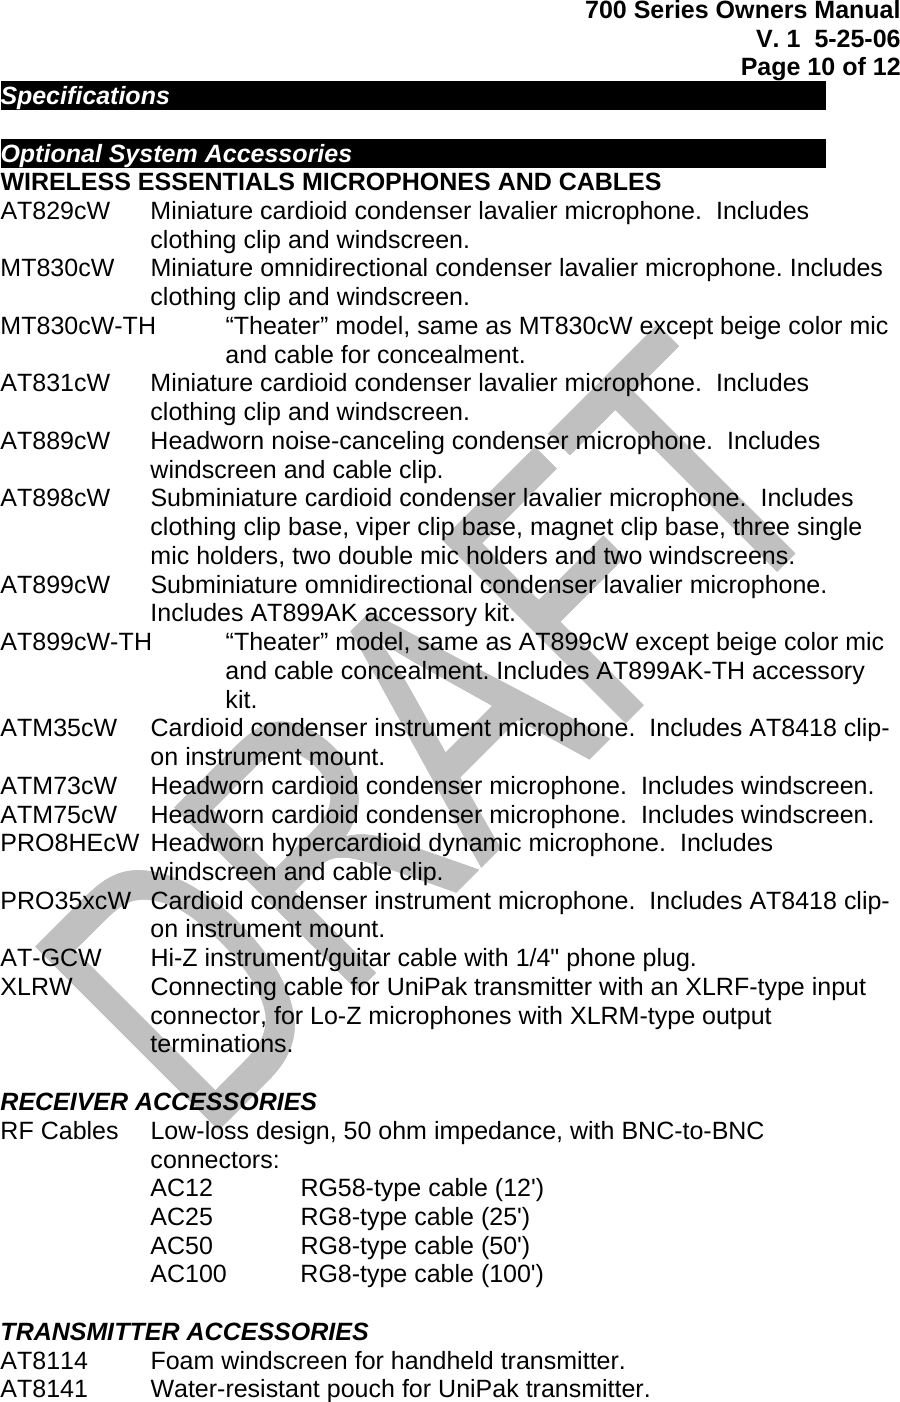 700 Series Owners Manual V. 1  5-25-06 Page 10 of 12  Specifications             Optional System Accessories          WIRELESS ESSENTIALS MICROPHONES AND CABLES  AT829cW   Miniature cardioid condenser lavalier microphone.  Includes clothing clip and windscreen. MT830cW   Miniature omnidirectional condenser lavalier microphone. Includes clothing clip and windscreen. MT830cW-TH   “Theater” model, same as MT830cW except beige color mic and cable for concealment. AT831cW   Miniature cardioid condenser lavalier microphone.  Includes clothing clip and windscreen. AT889cW   Headworn noise-canceling condenser microphone.  Includes windscreen and cable clip. AT898cW   Subminiature cardioid condenser lavalier microphone.  Includes clothing clip base, viper clip base, magnet clip base, three single mic holders, two double mic holders and two windscreens. AT899cW   Subminiature omnidirectional condenser lavalier microphone.  Includes AT899AK accessory kit. AT899cW-TH   “Theater” model, same as AT899cW except beige color mic and cable concealment. Includes AT899AK-TH accessory kit. ATM35cW   Cardioid condenser instrument microphone.  Includes AT8418 clip-on instrument mount. ATM73cW   Headworn cardioid condenser microphone.  Includes windscreen. ATM75cW   Headworn cardioid condenser microphone.  Includes windscreen. PRO8HEcW  Headworn hypercardioid dynamic microphone.  Includes windscreen and cable clip. PRO35xcW   Cardioid condenser instrument microphone.  Includes AT8418 clip-on instrument mount. AT-GCW   Hi-Z instrument/guitar cable with 1/4&quot; phone plug. XLRW   Connecting cable for UniPak transmitter with an XLRF-type input connector, for Lo-Z microphones with XLRM-type output terminations.  RECEIVER ACCESSORIES RF Cables   Low-loss design, 50 ohm impedance, with BNC-to-BNC connectors: AC12    RG58-type cable (12&apos;) AC25    RG8-type cable (25&apos;) AC50    RG8-type cable (50&apos;) AC100   RG8-type cable (100&apos;)  TRANSMITTER ACCESSORIES AT8114   Foam windscreen for handheld transmitter. AT8141   Water-resistant pouch for UniPak transmitter. 